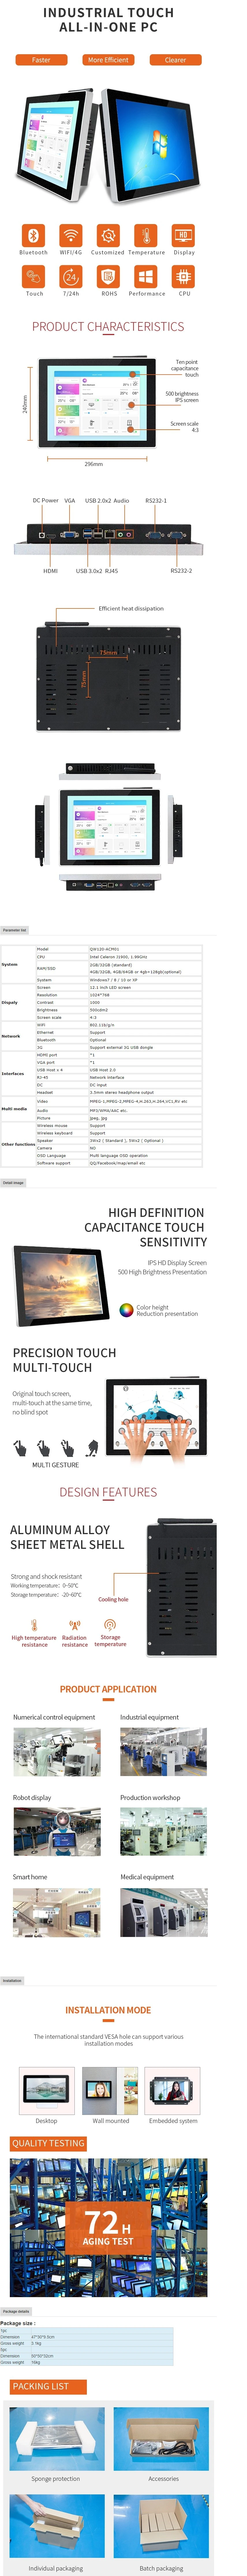 Square Screen Interactive Information Display LCD Touch Screen Kiosk12 Inch for Medical Equipment